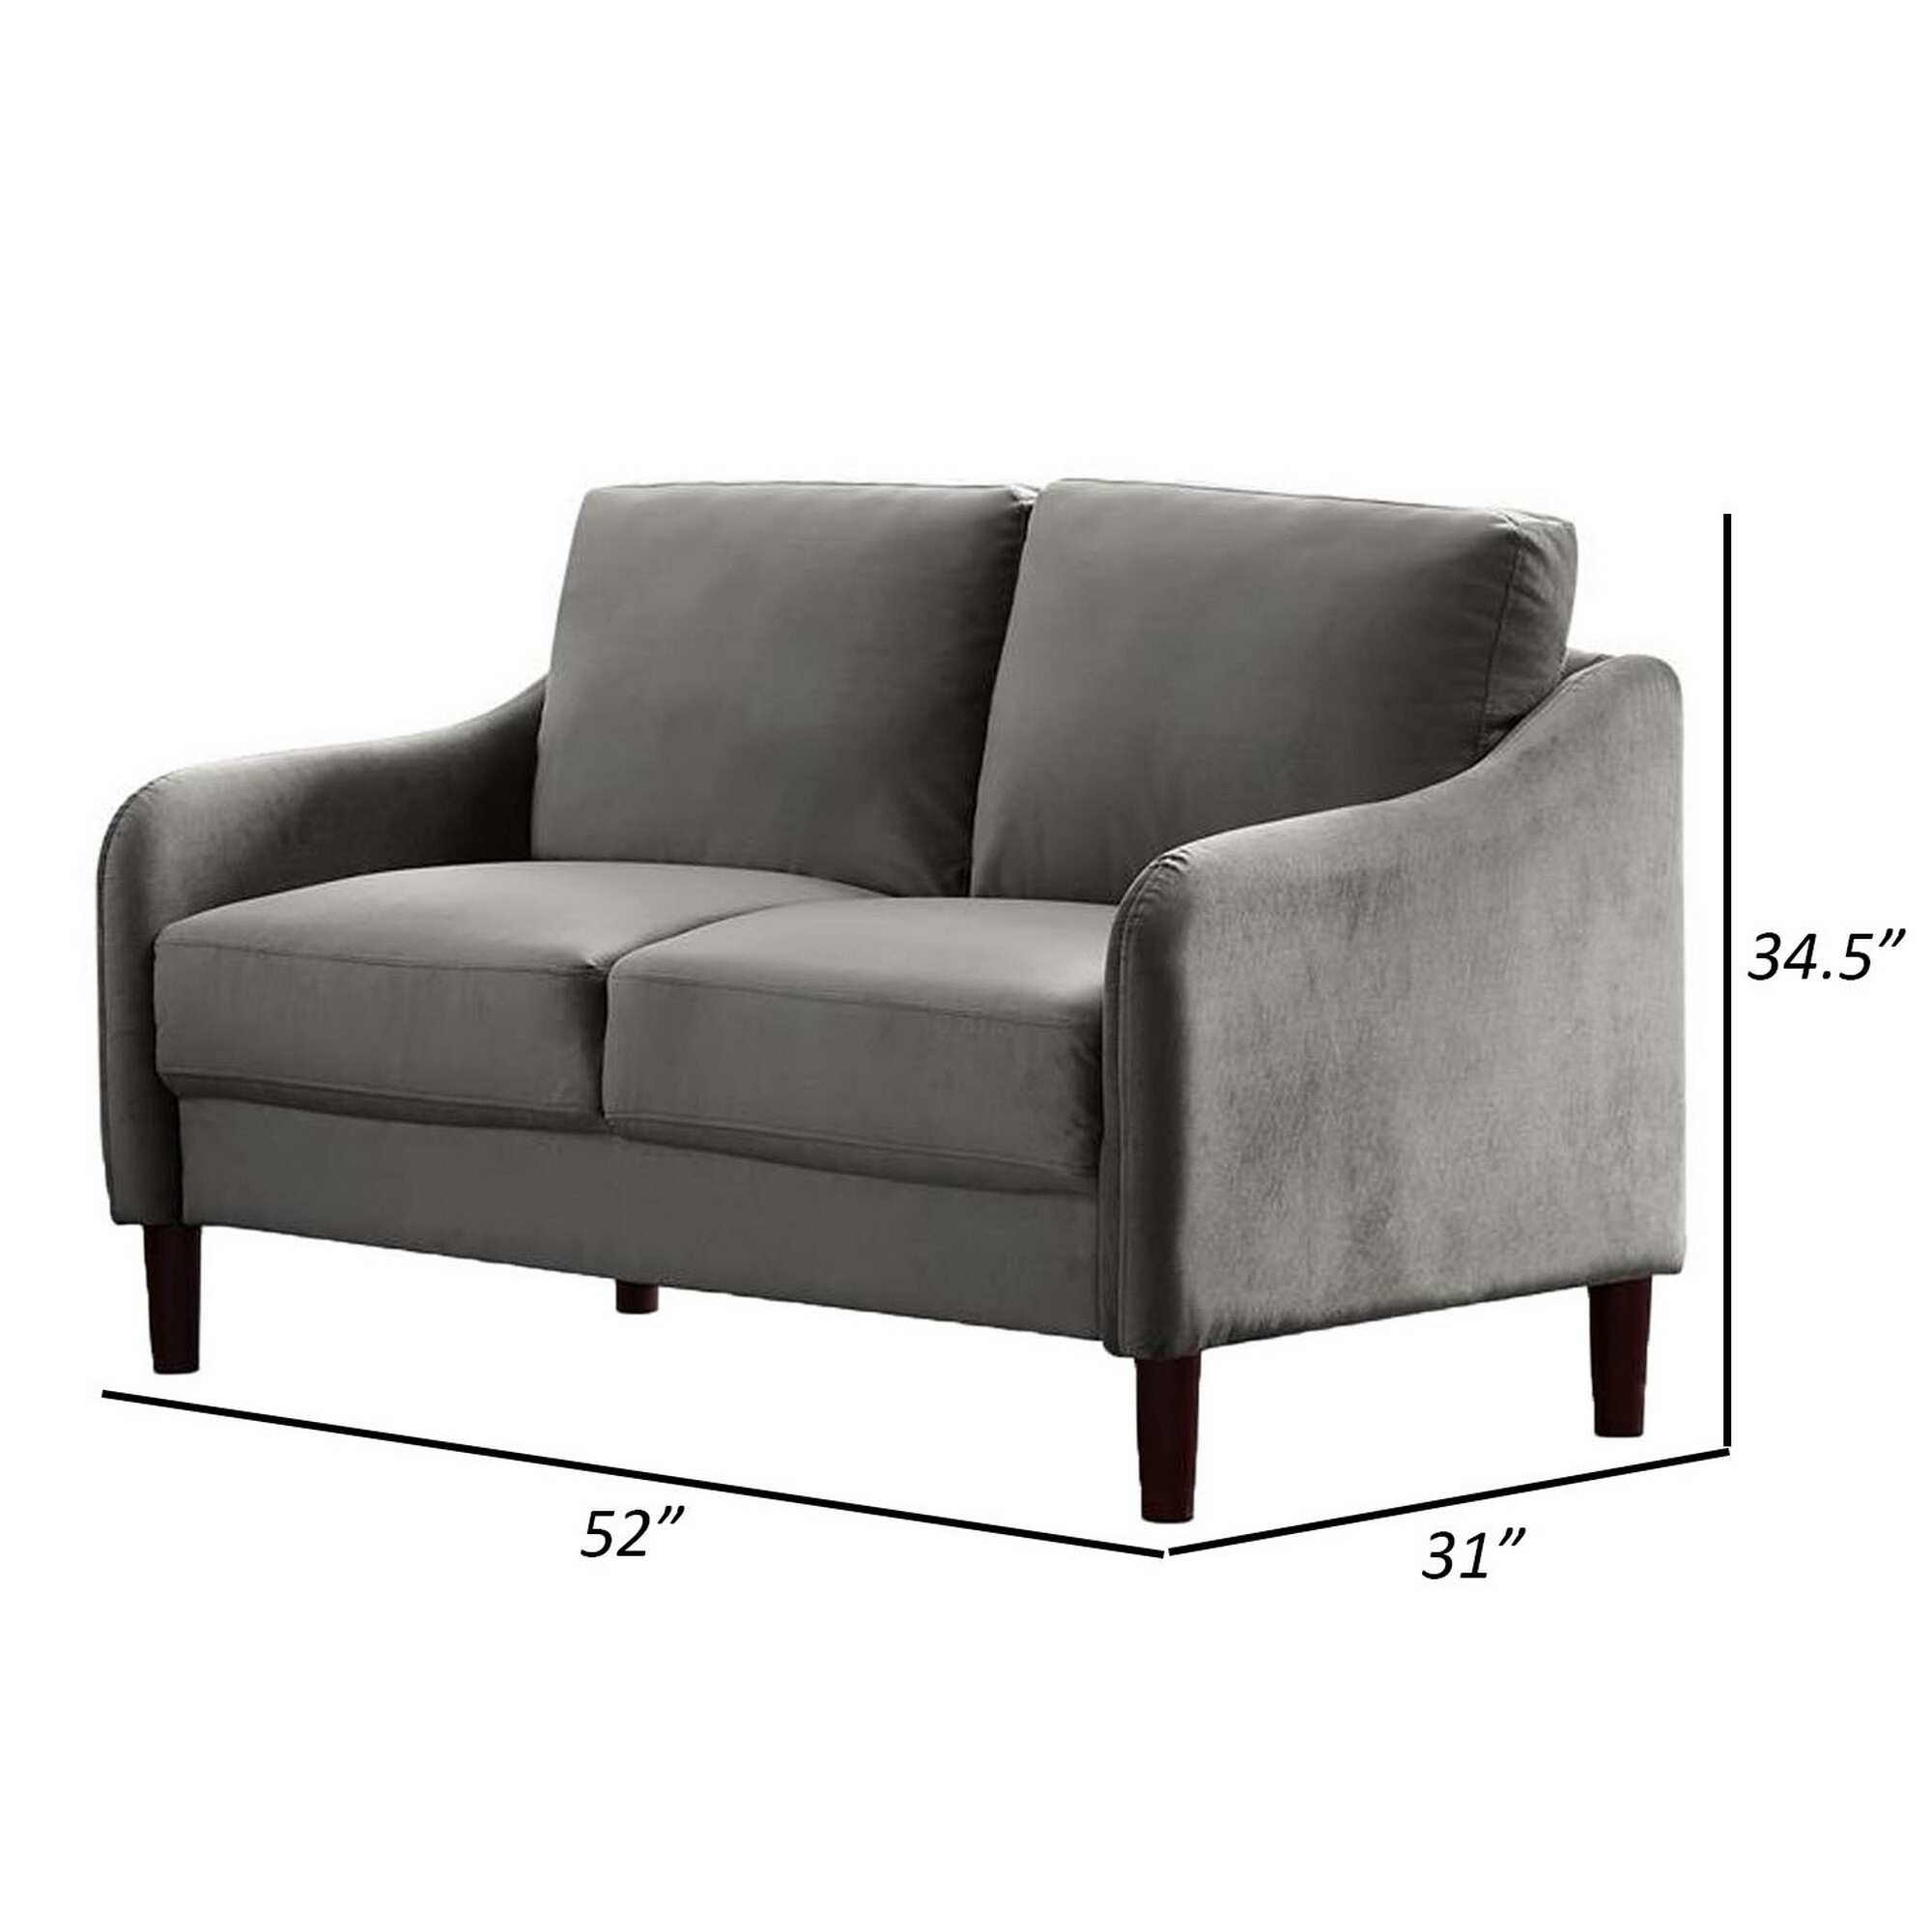 Foz 52 Inch Loveseat, Sloped Arms, Round Tapered Legs, Gray Flannelette